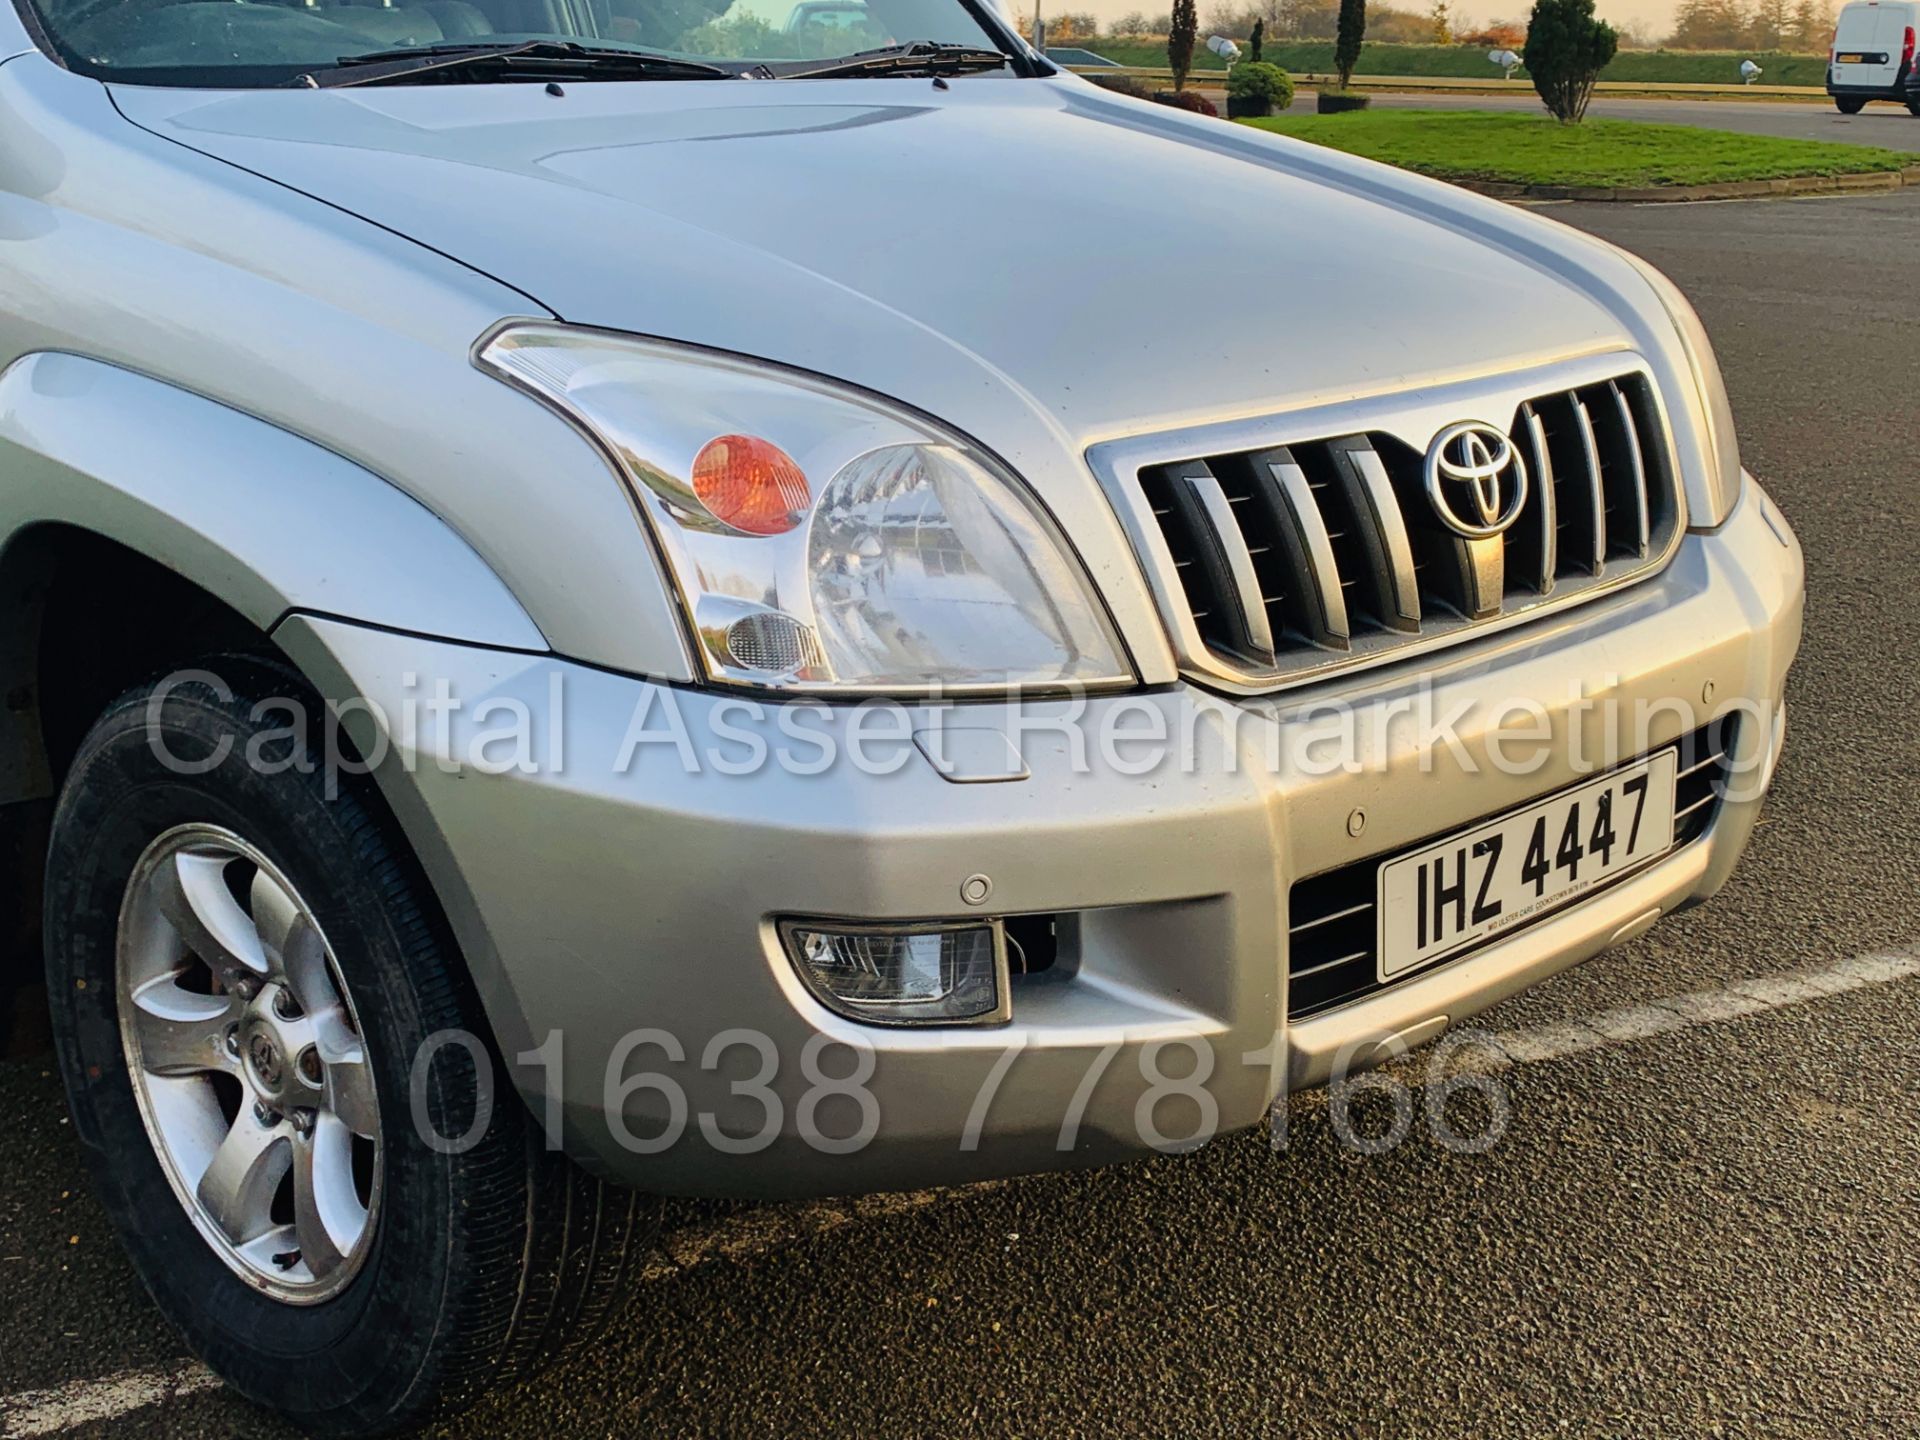 TOYOTA LAND CRUISER *INVINCIBLE* 7 SEATER SUV (2007 MODEL) '3.0 D-4D -AUTOMATIC' *TOP SPEC* (NO VAT) - Image 13 of 50